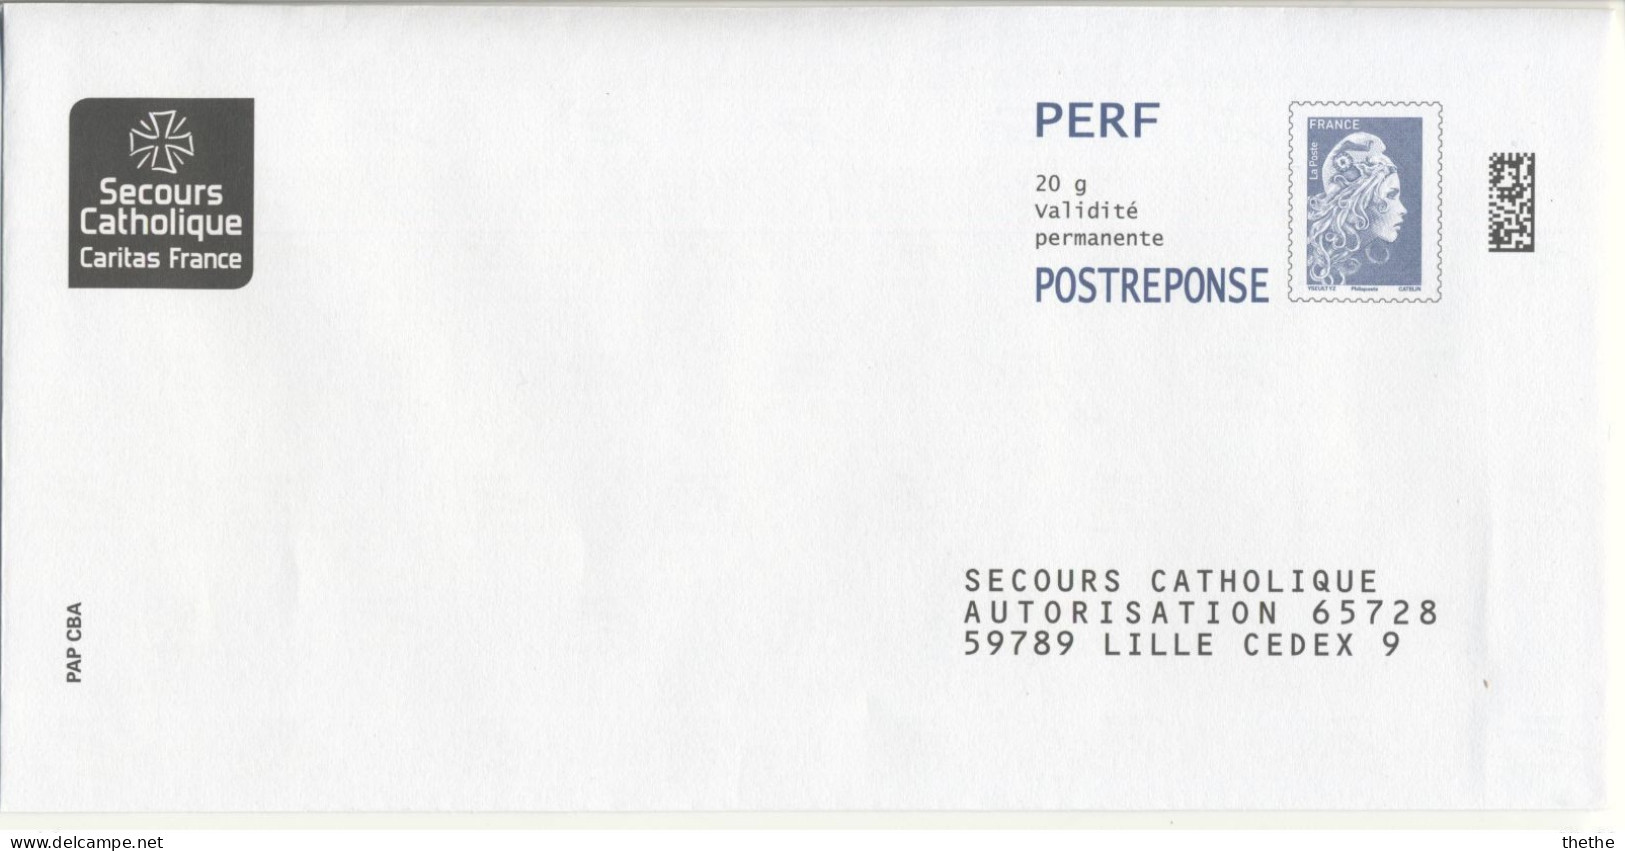 France - Enveloppe - Secours Catholique - PAP  - POSTREPONSE - PERF - 410138 - PAP : Antwoord /Ciappa-Kavena